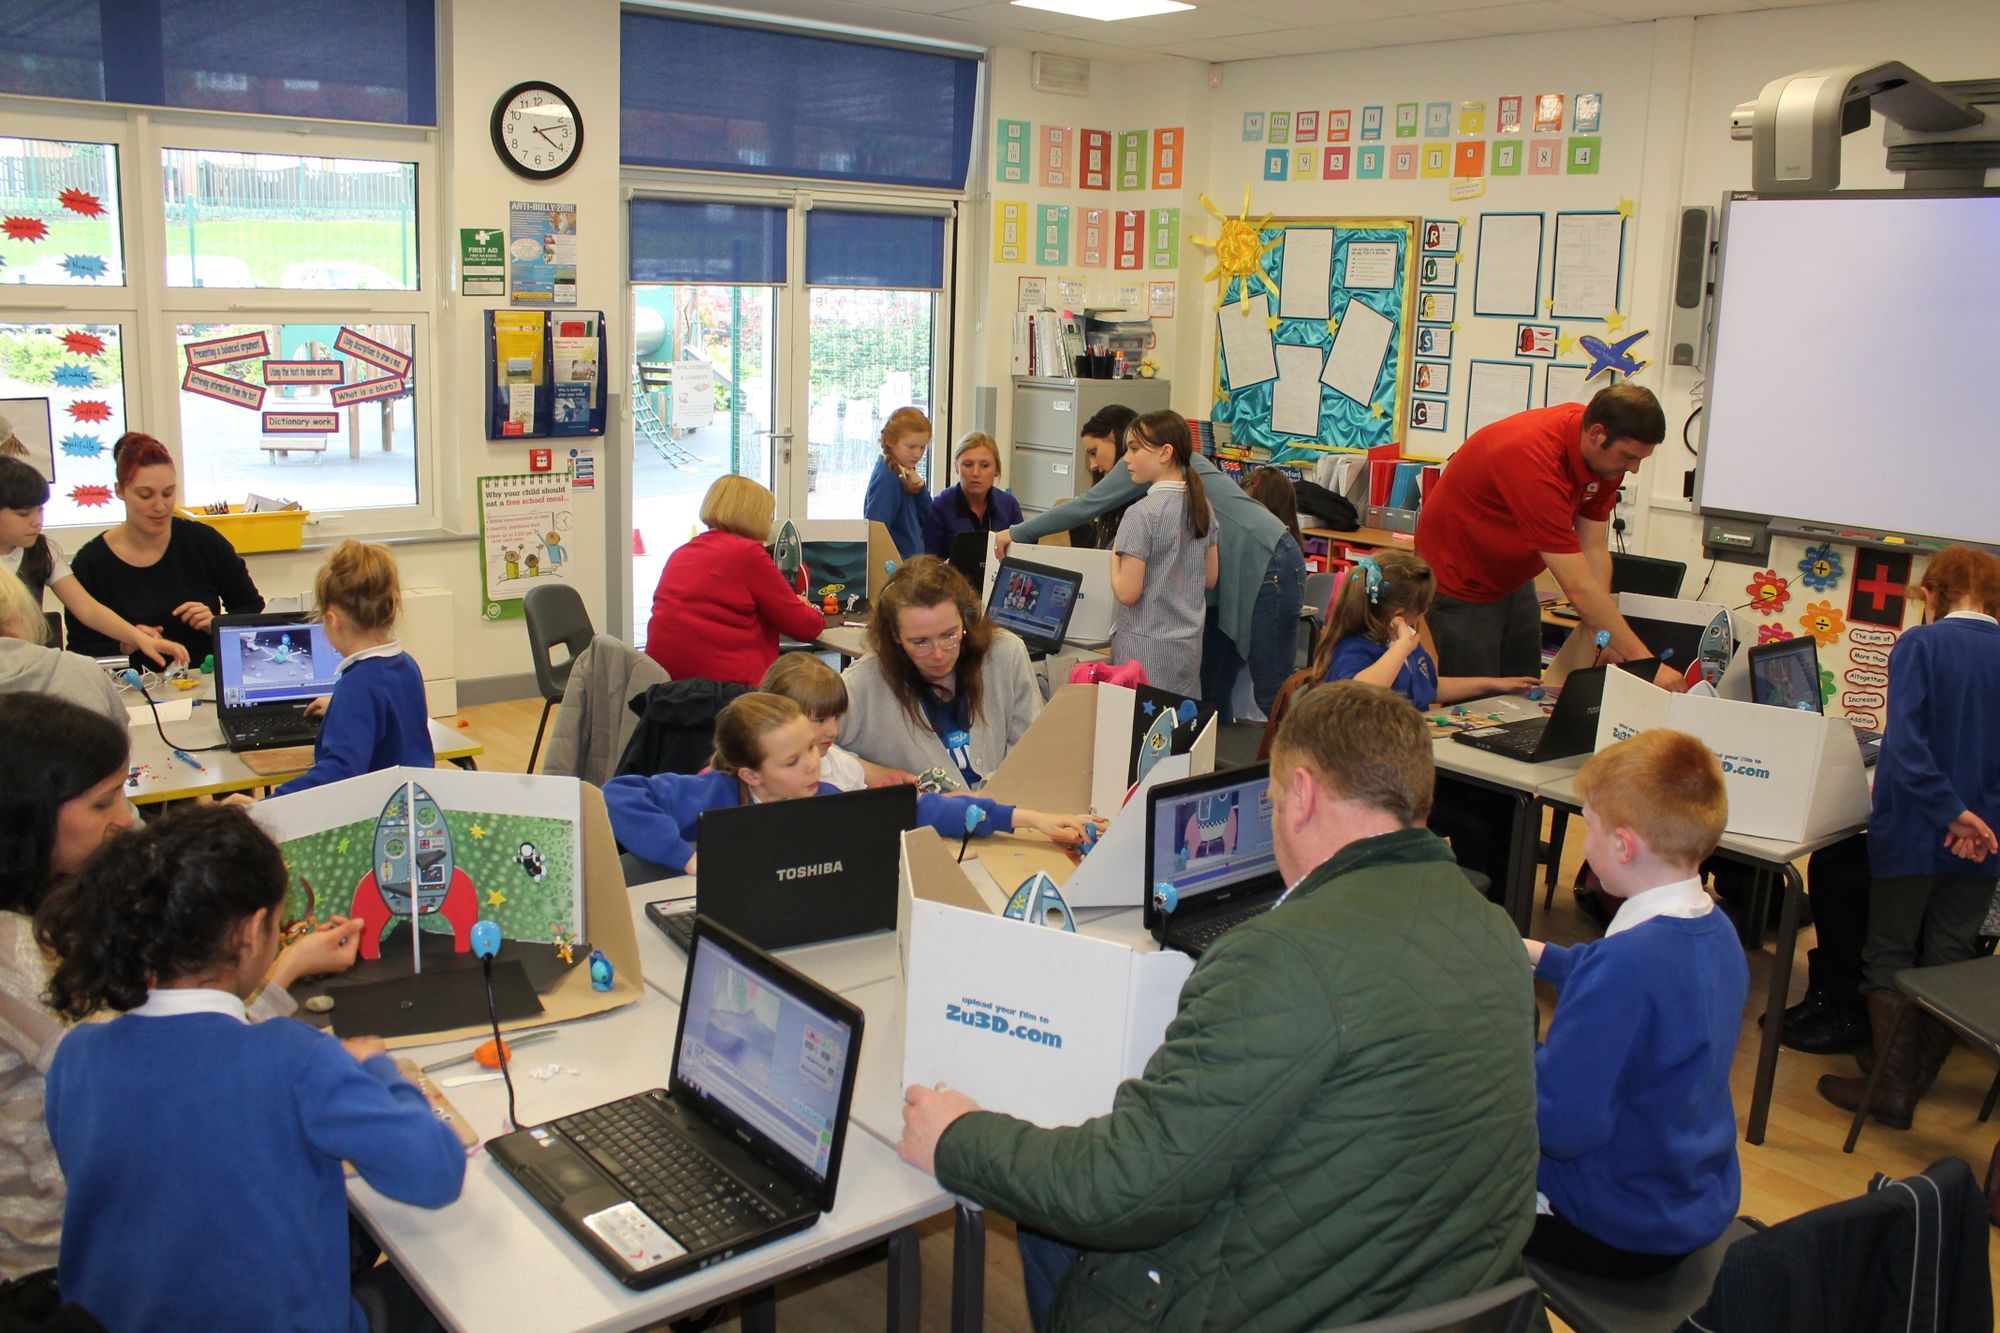 A classroom of children animating with Zu3D, a family learning day with parents helping